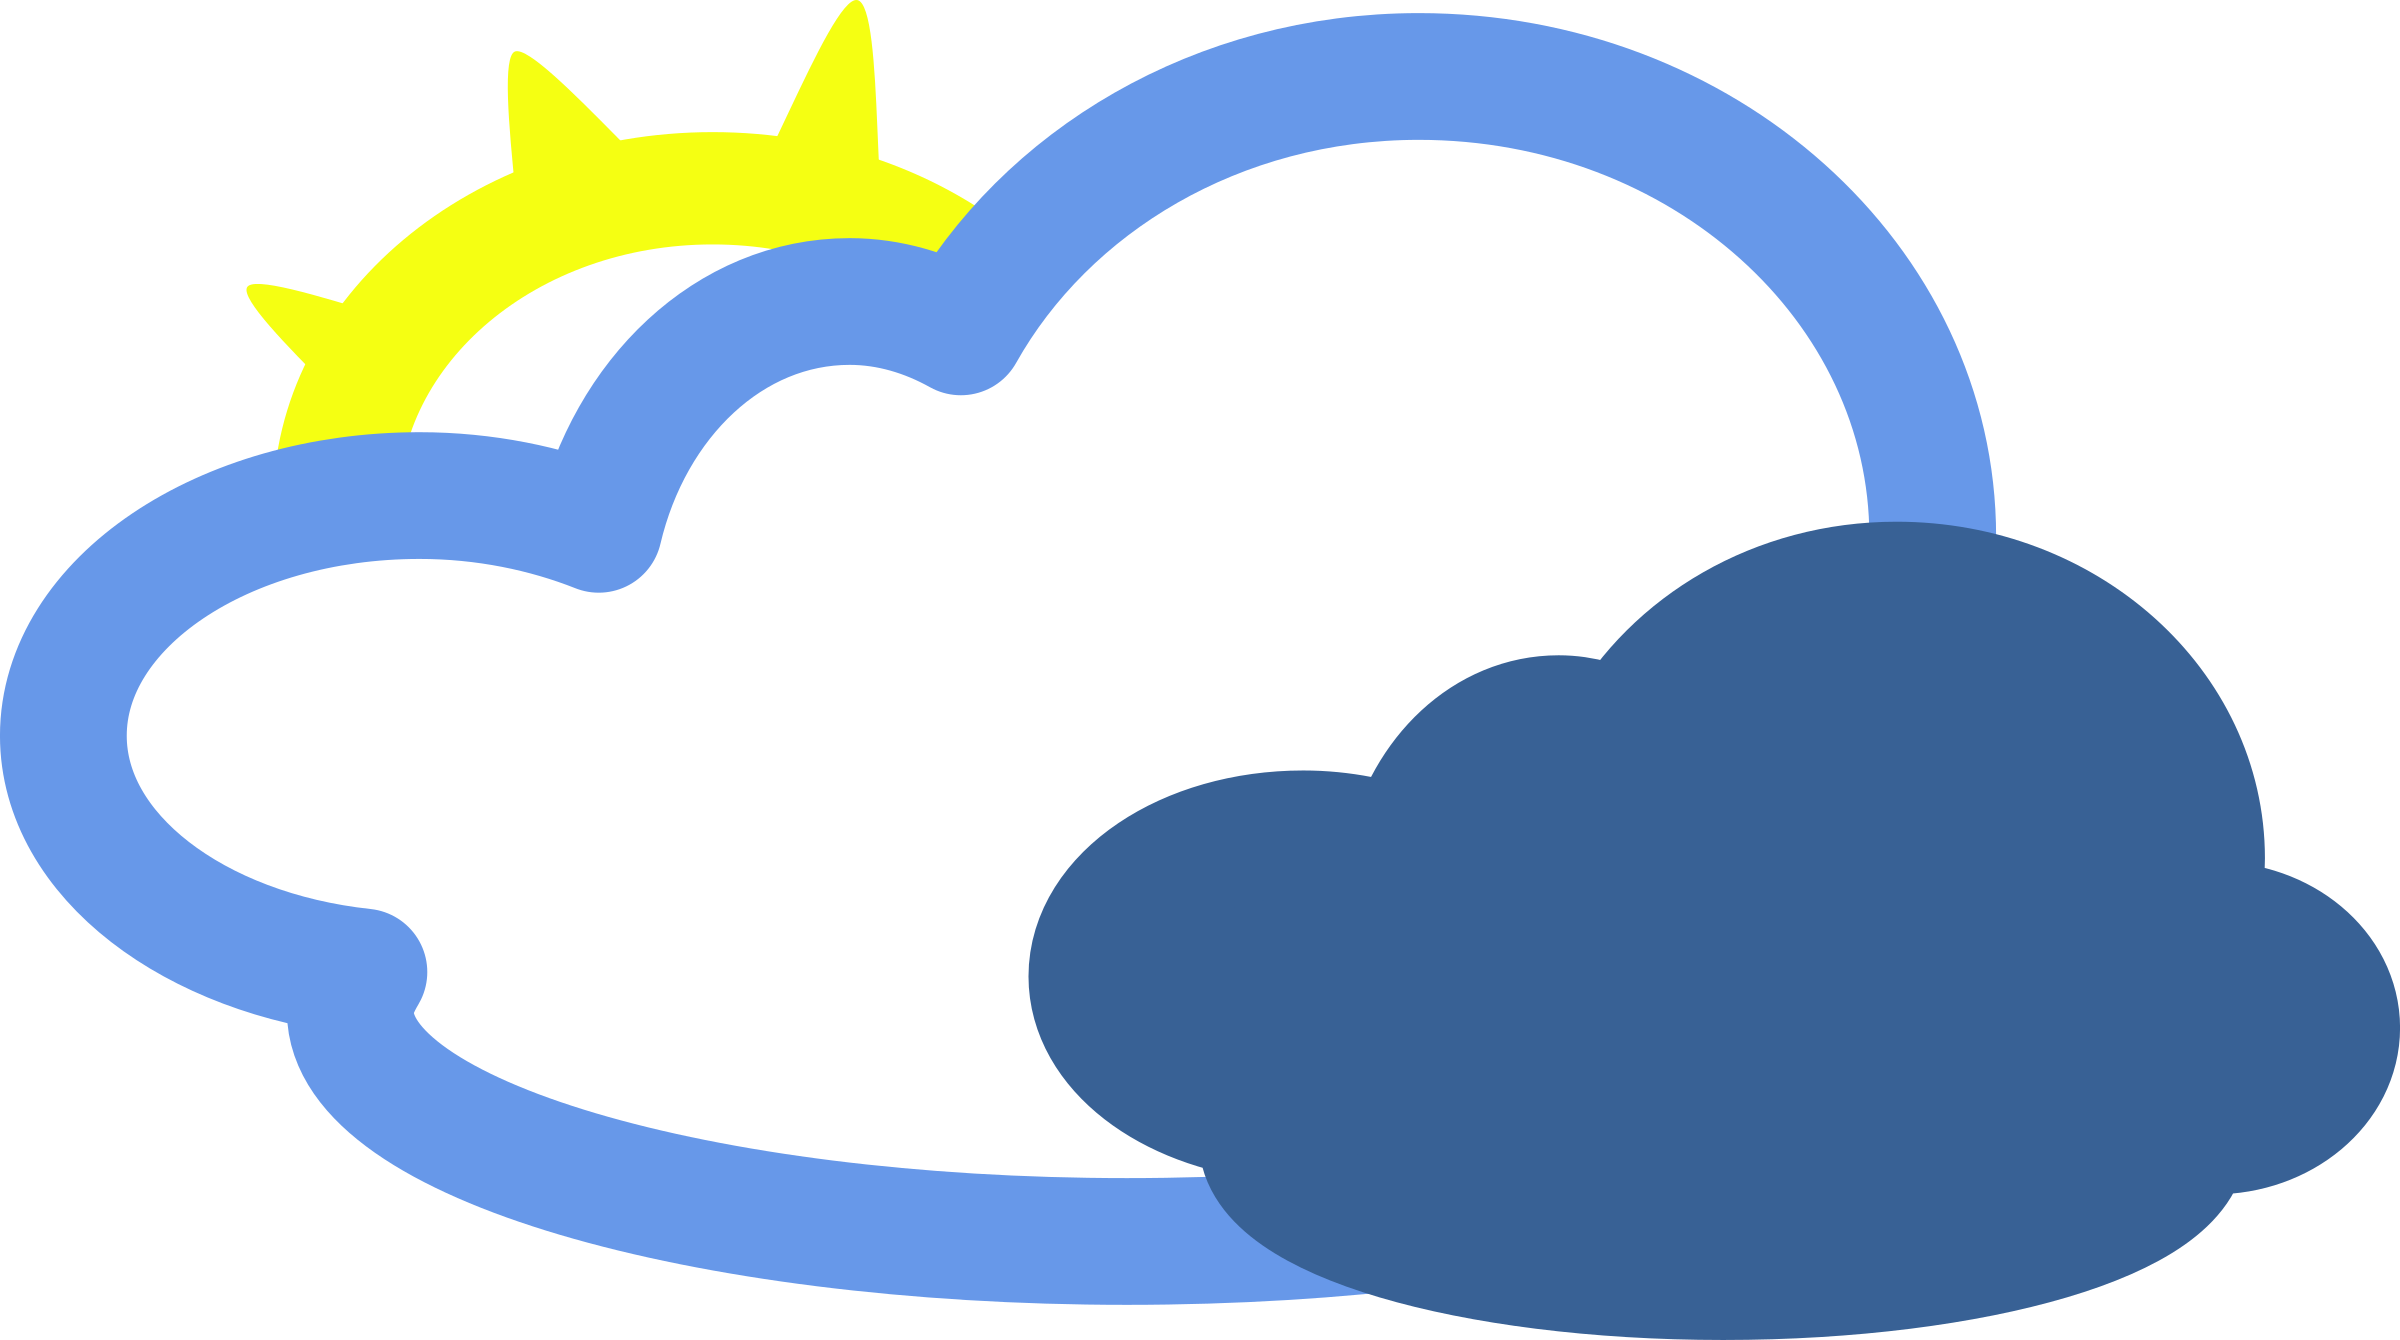 Weather - Mostly Cloudy Weather Symbol (2400x1340)